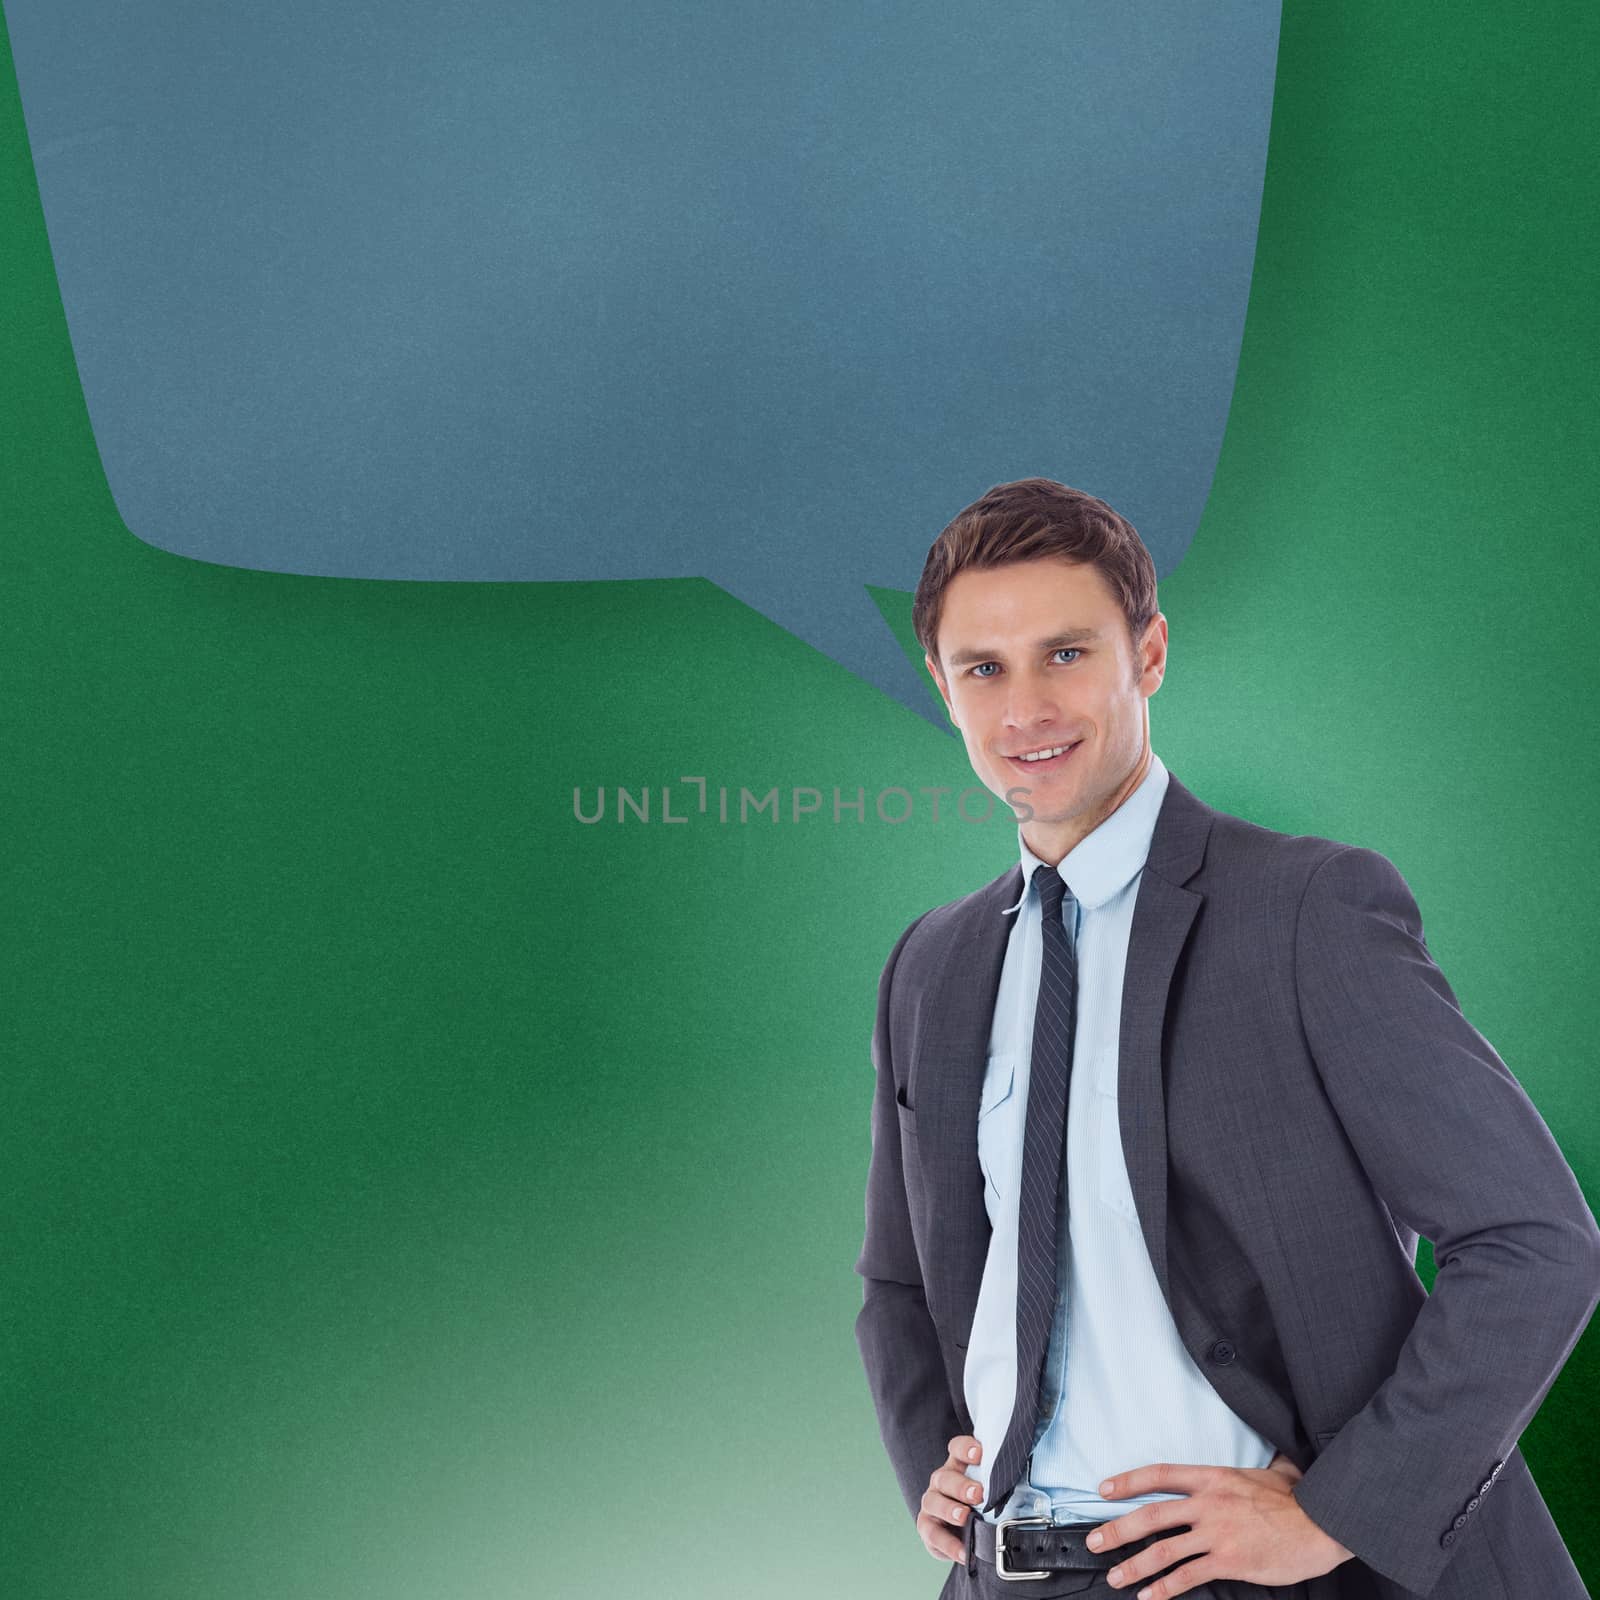 Smiling businessman with hands on hips with speech bubble against green vignette